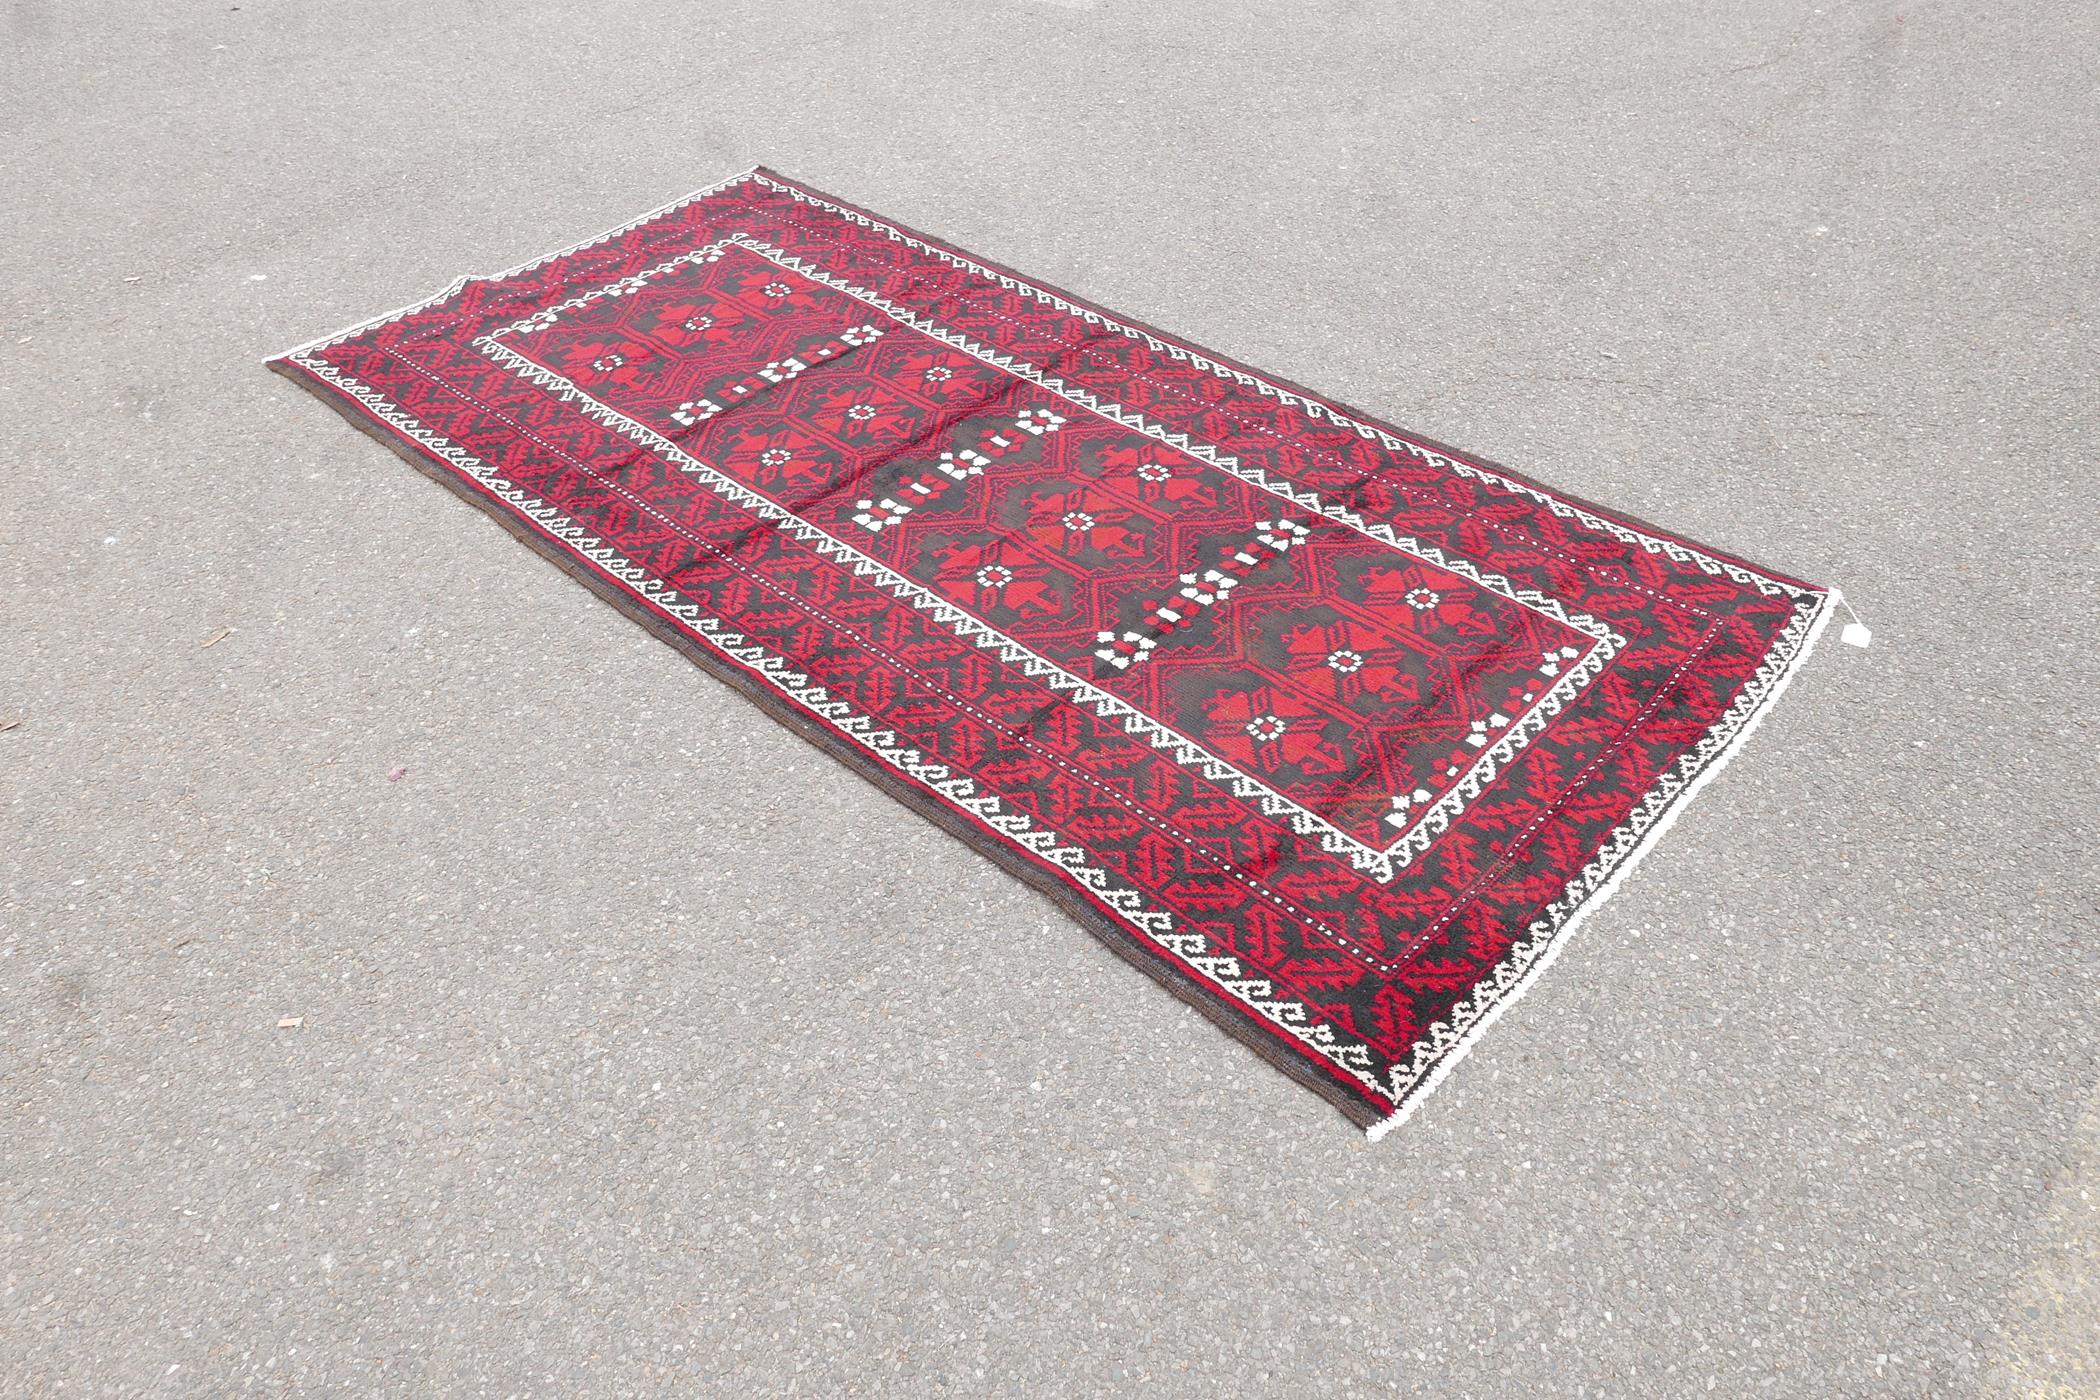 Hand woven full pile red and black ground Iranian Belouch rug, 50½" x 110" - Image 2 of 5